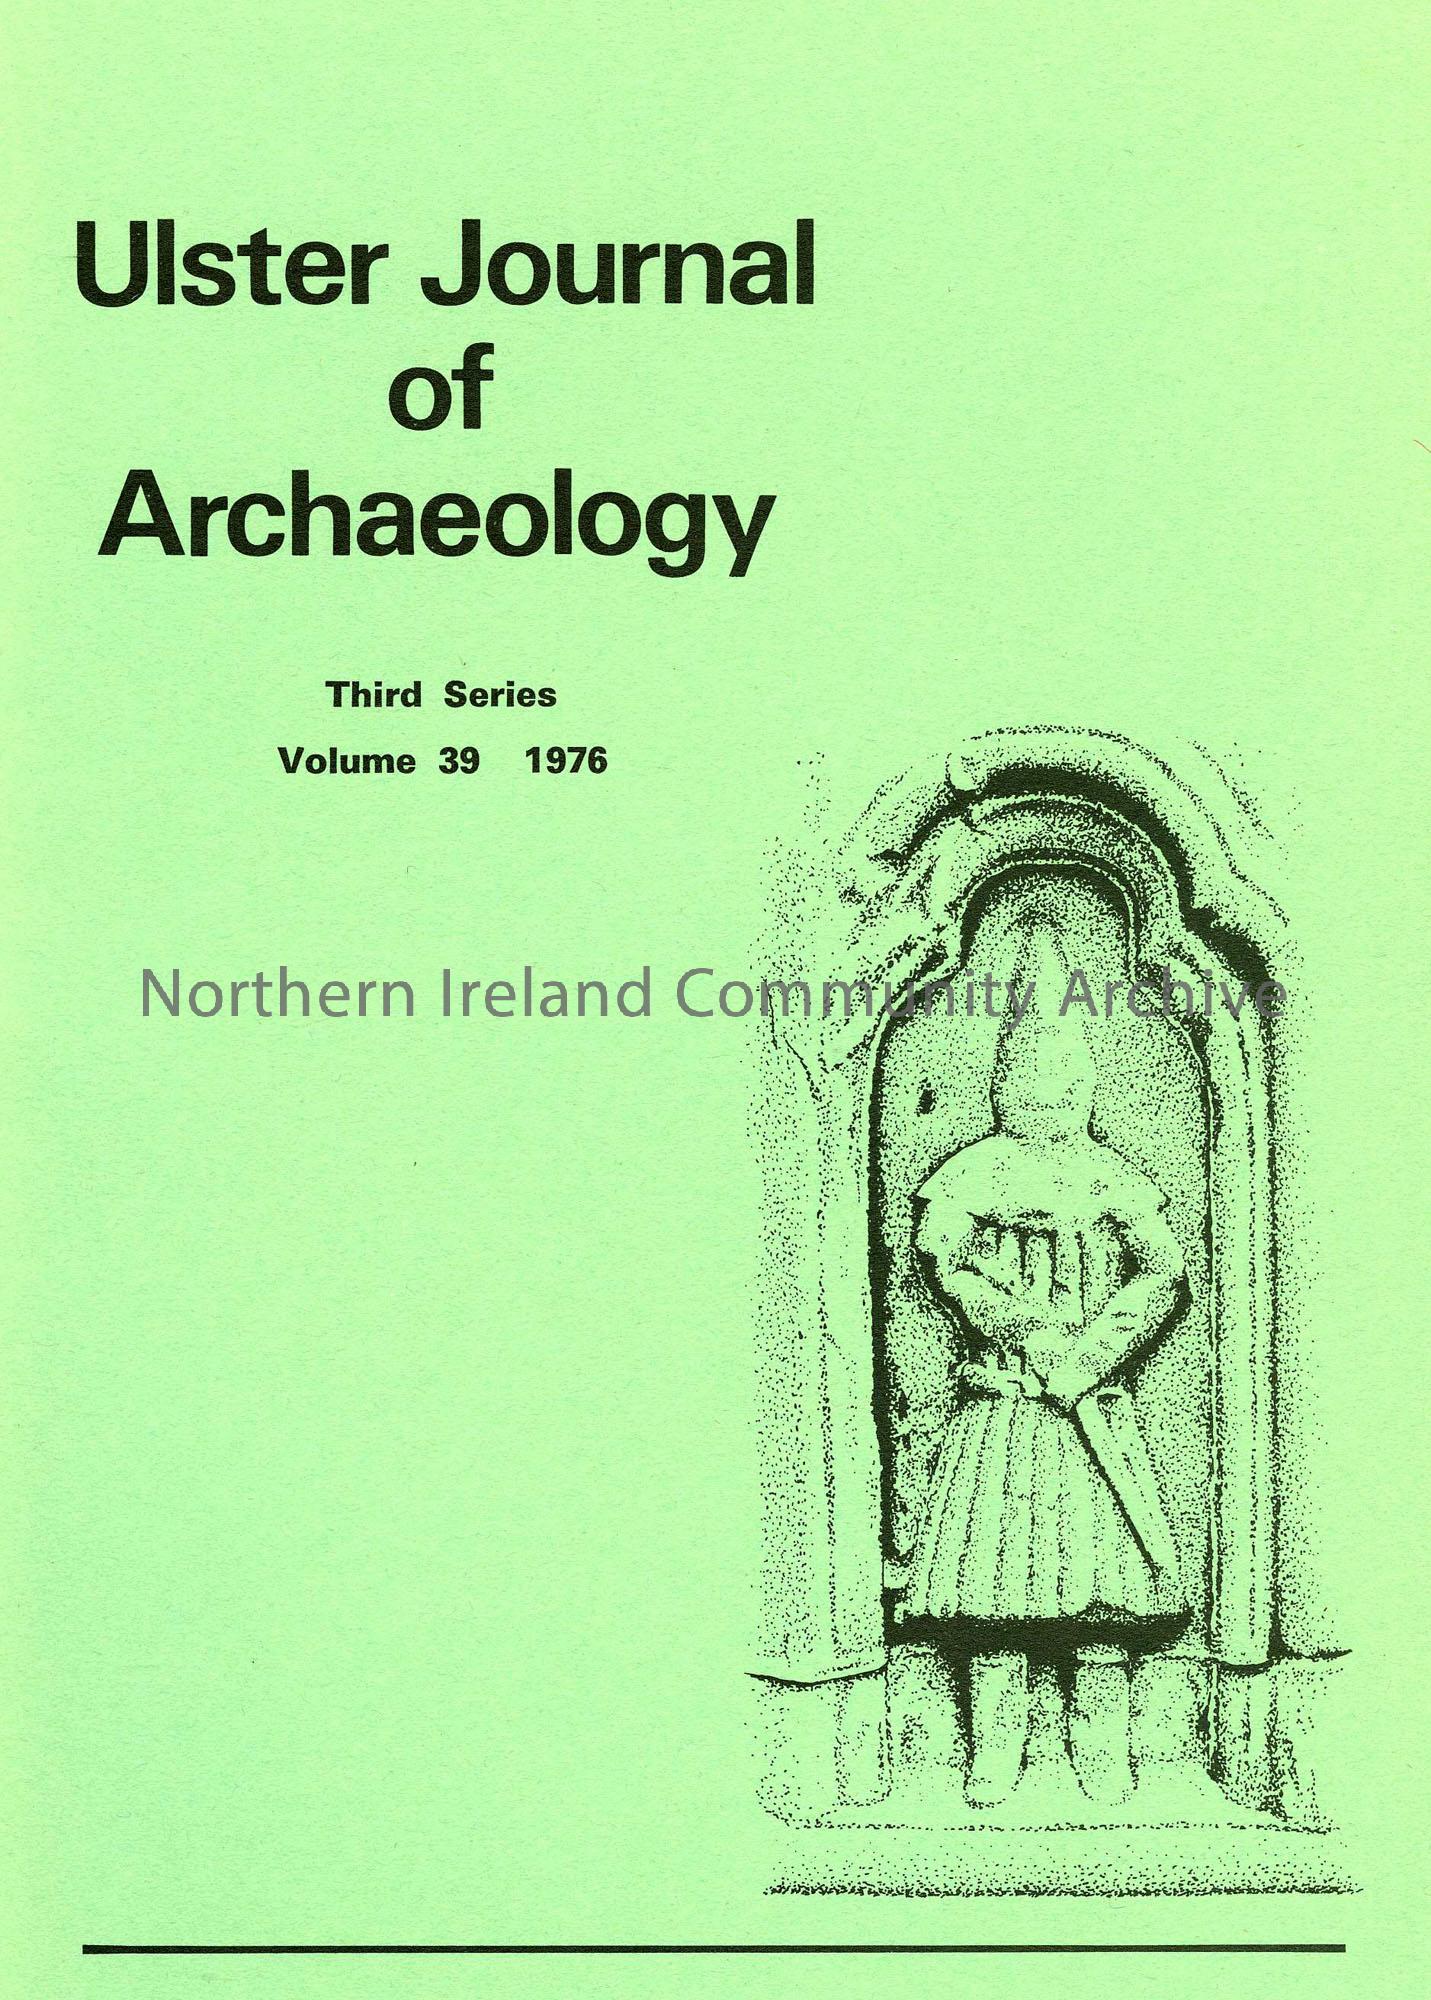 book titled, Ulster Journal of Archaeology. Third Series Volume 39, 1976 (5624)